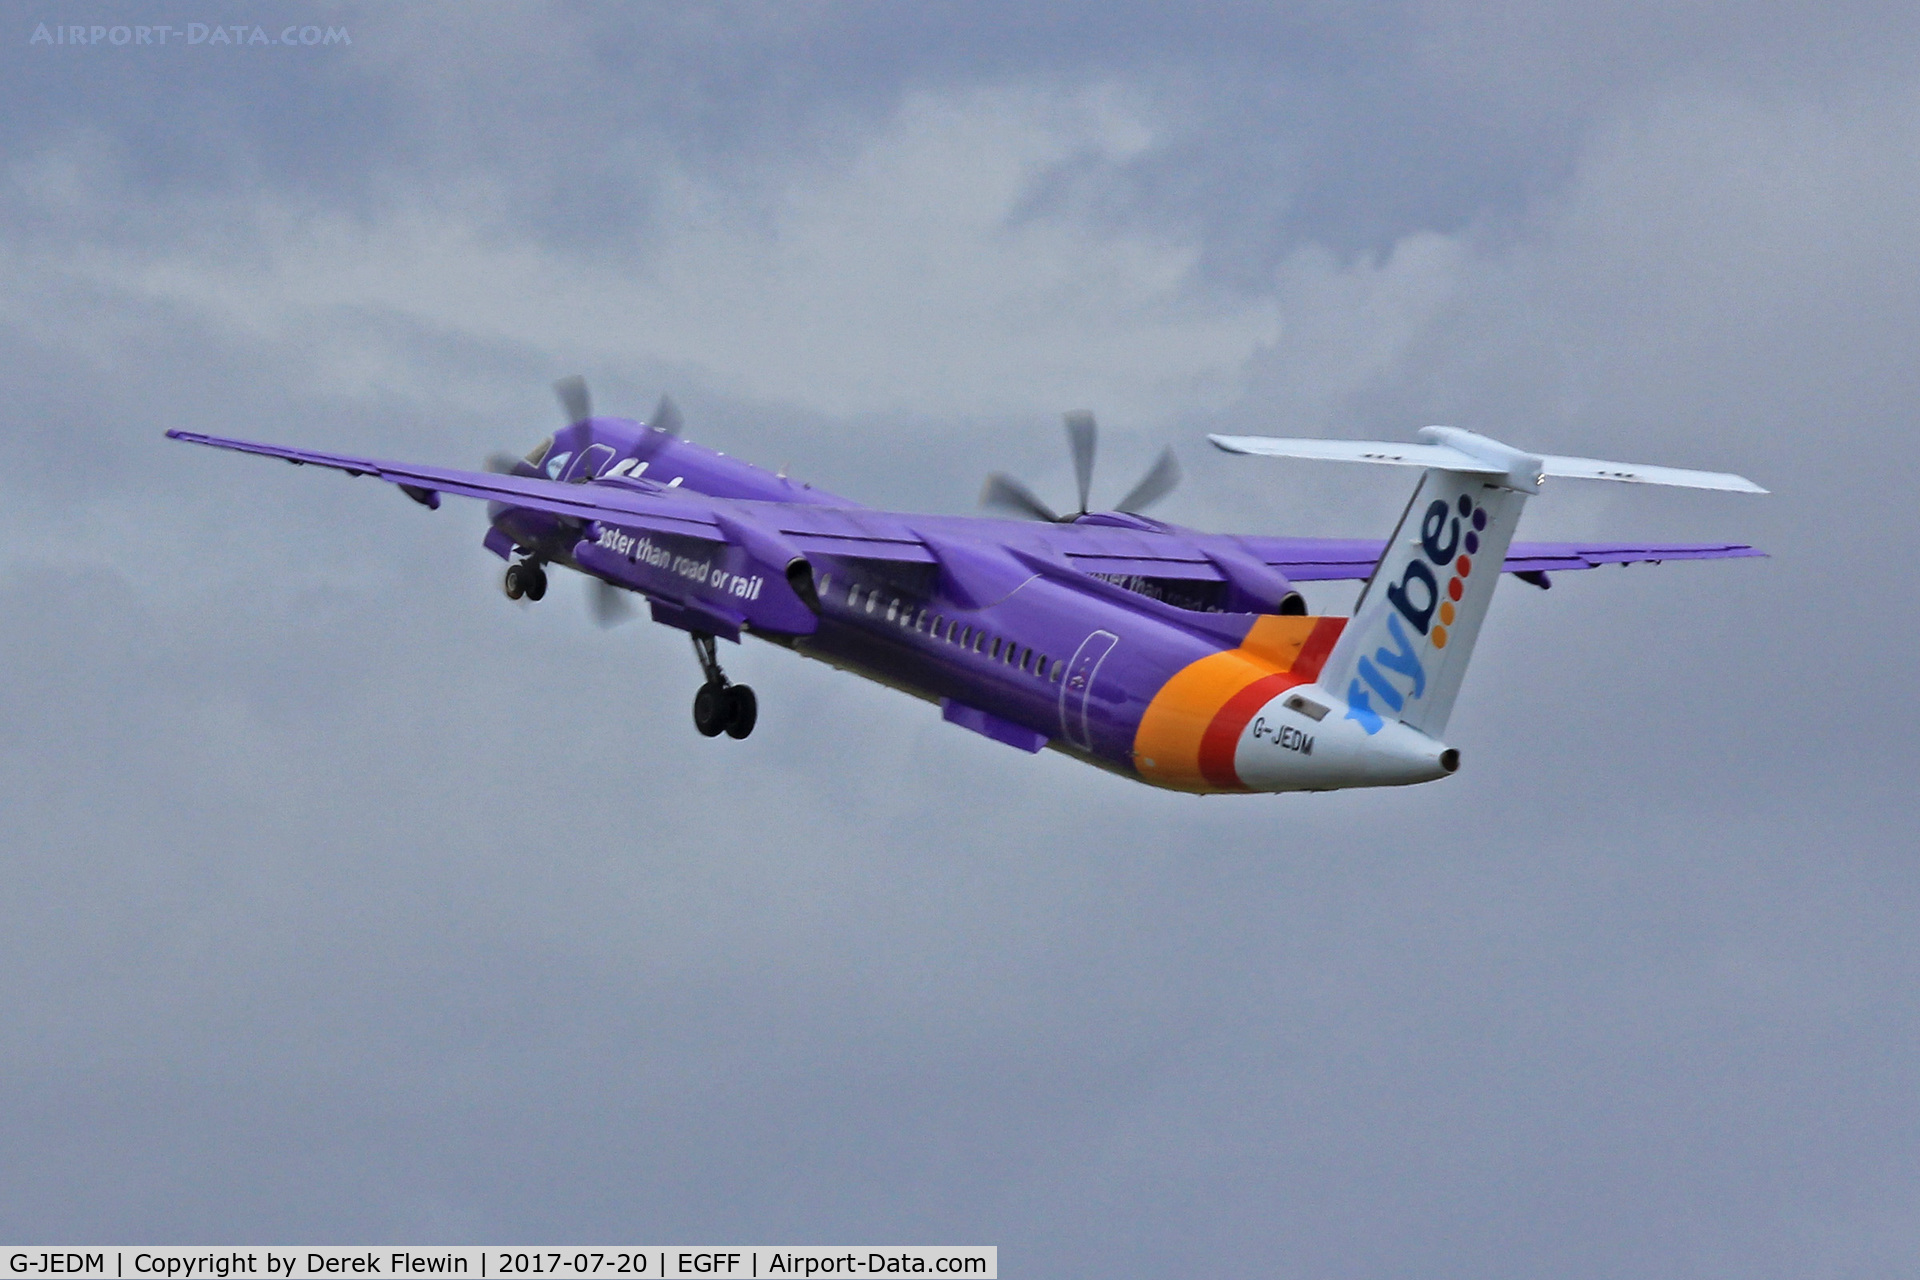 G-JEDM, 2003 De Havilland Canada DHC-8-402Q Dash 8 C/N 4077, DHC-8-402Q, Flybe callsign Jersey 618A, previously C-FGNP, seen departing runway 30 en-route to Belfast City.